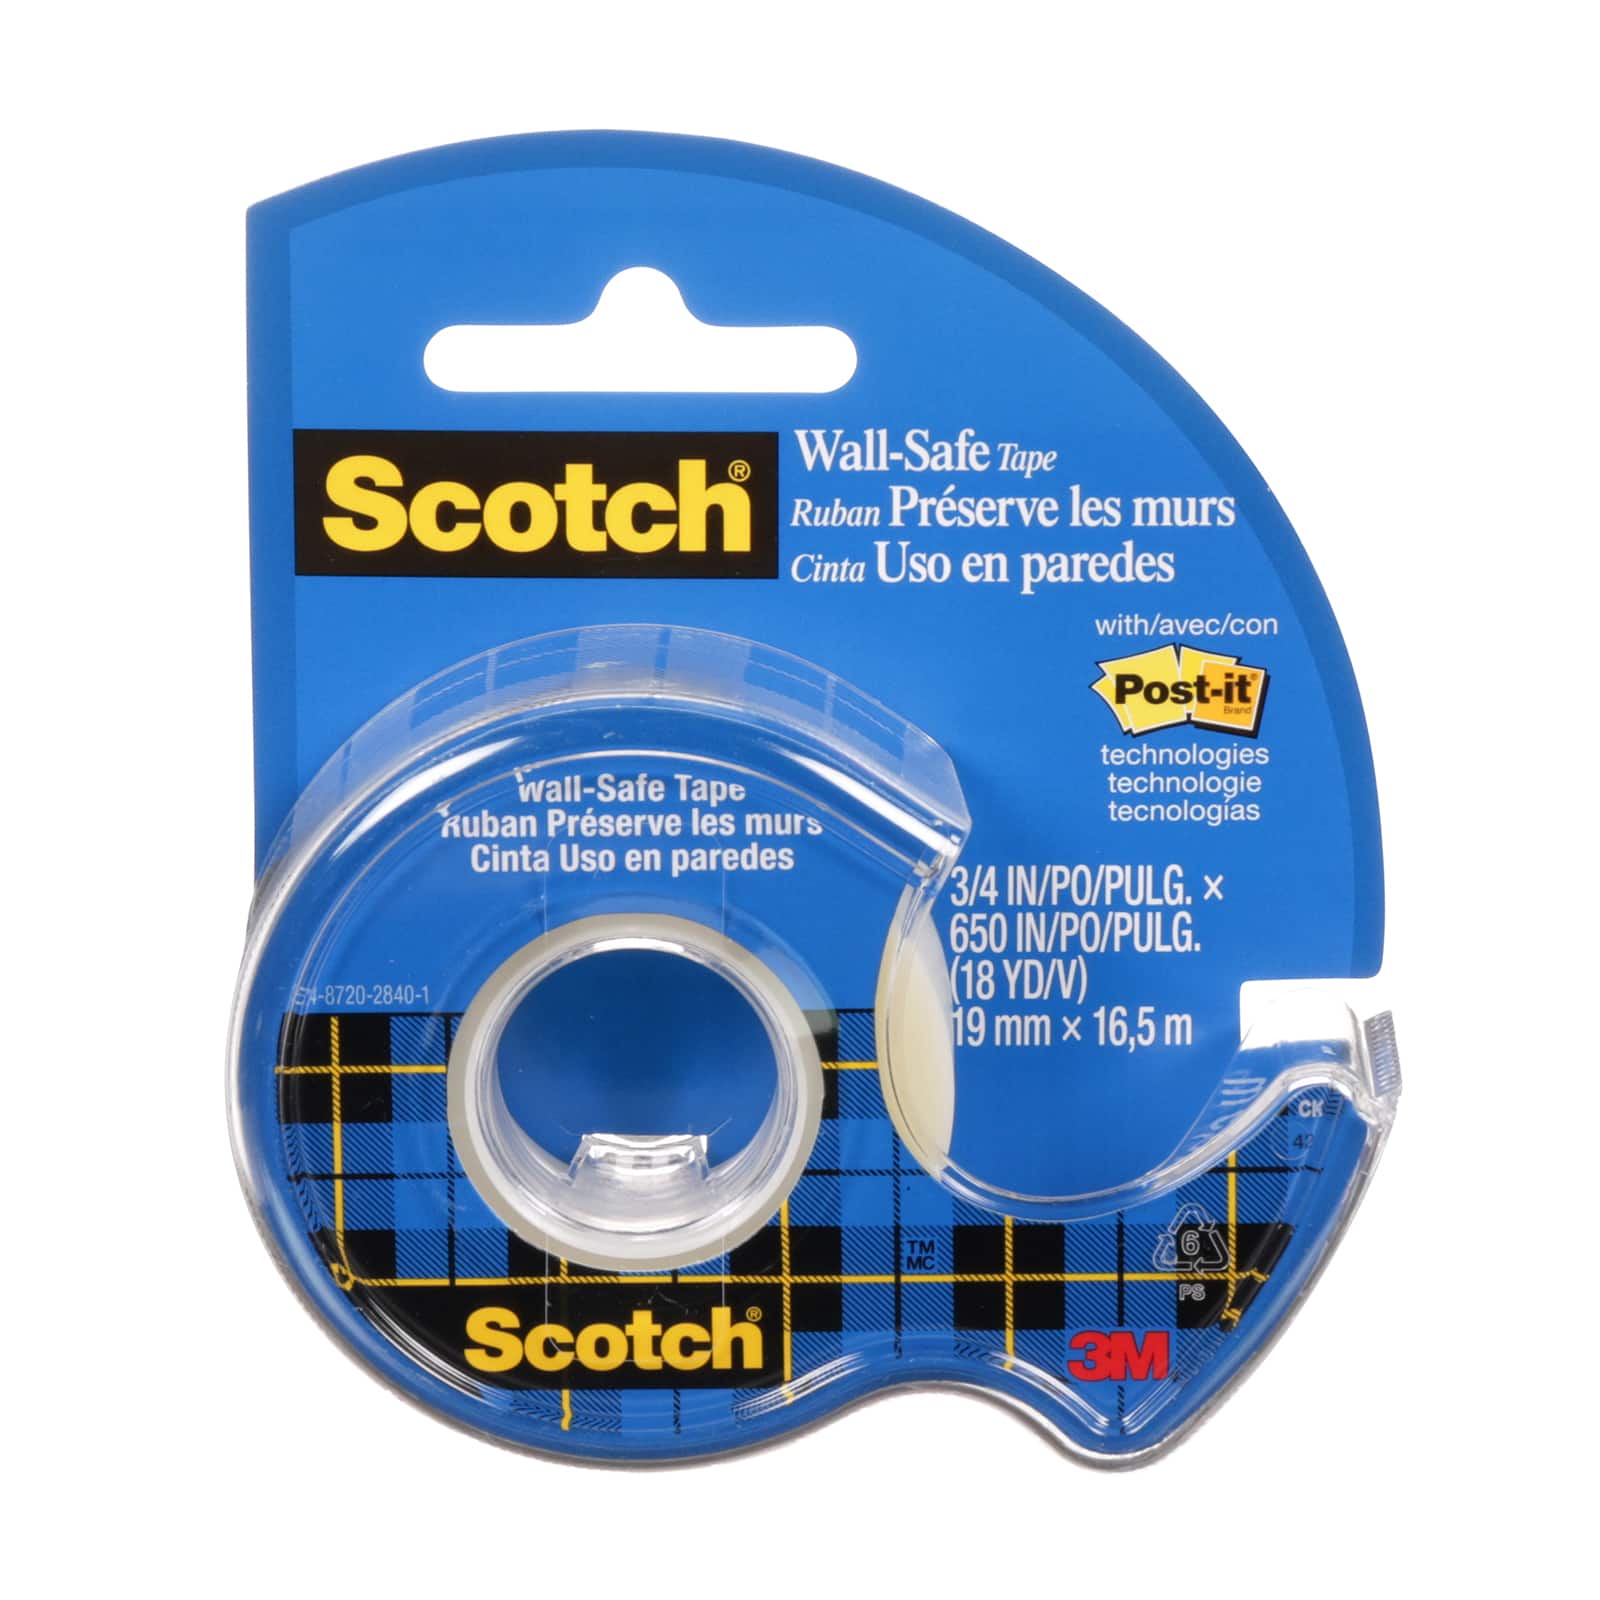 Scotch Wall-Safe Tape, Tape that cares as much about your wall as they  care about their masterpiece. #Scotchbrand #backtoschool, By Scotch